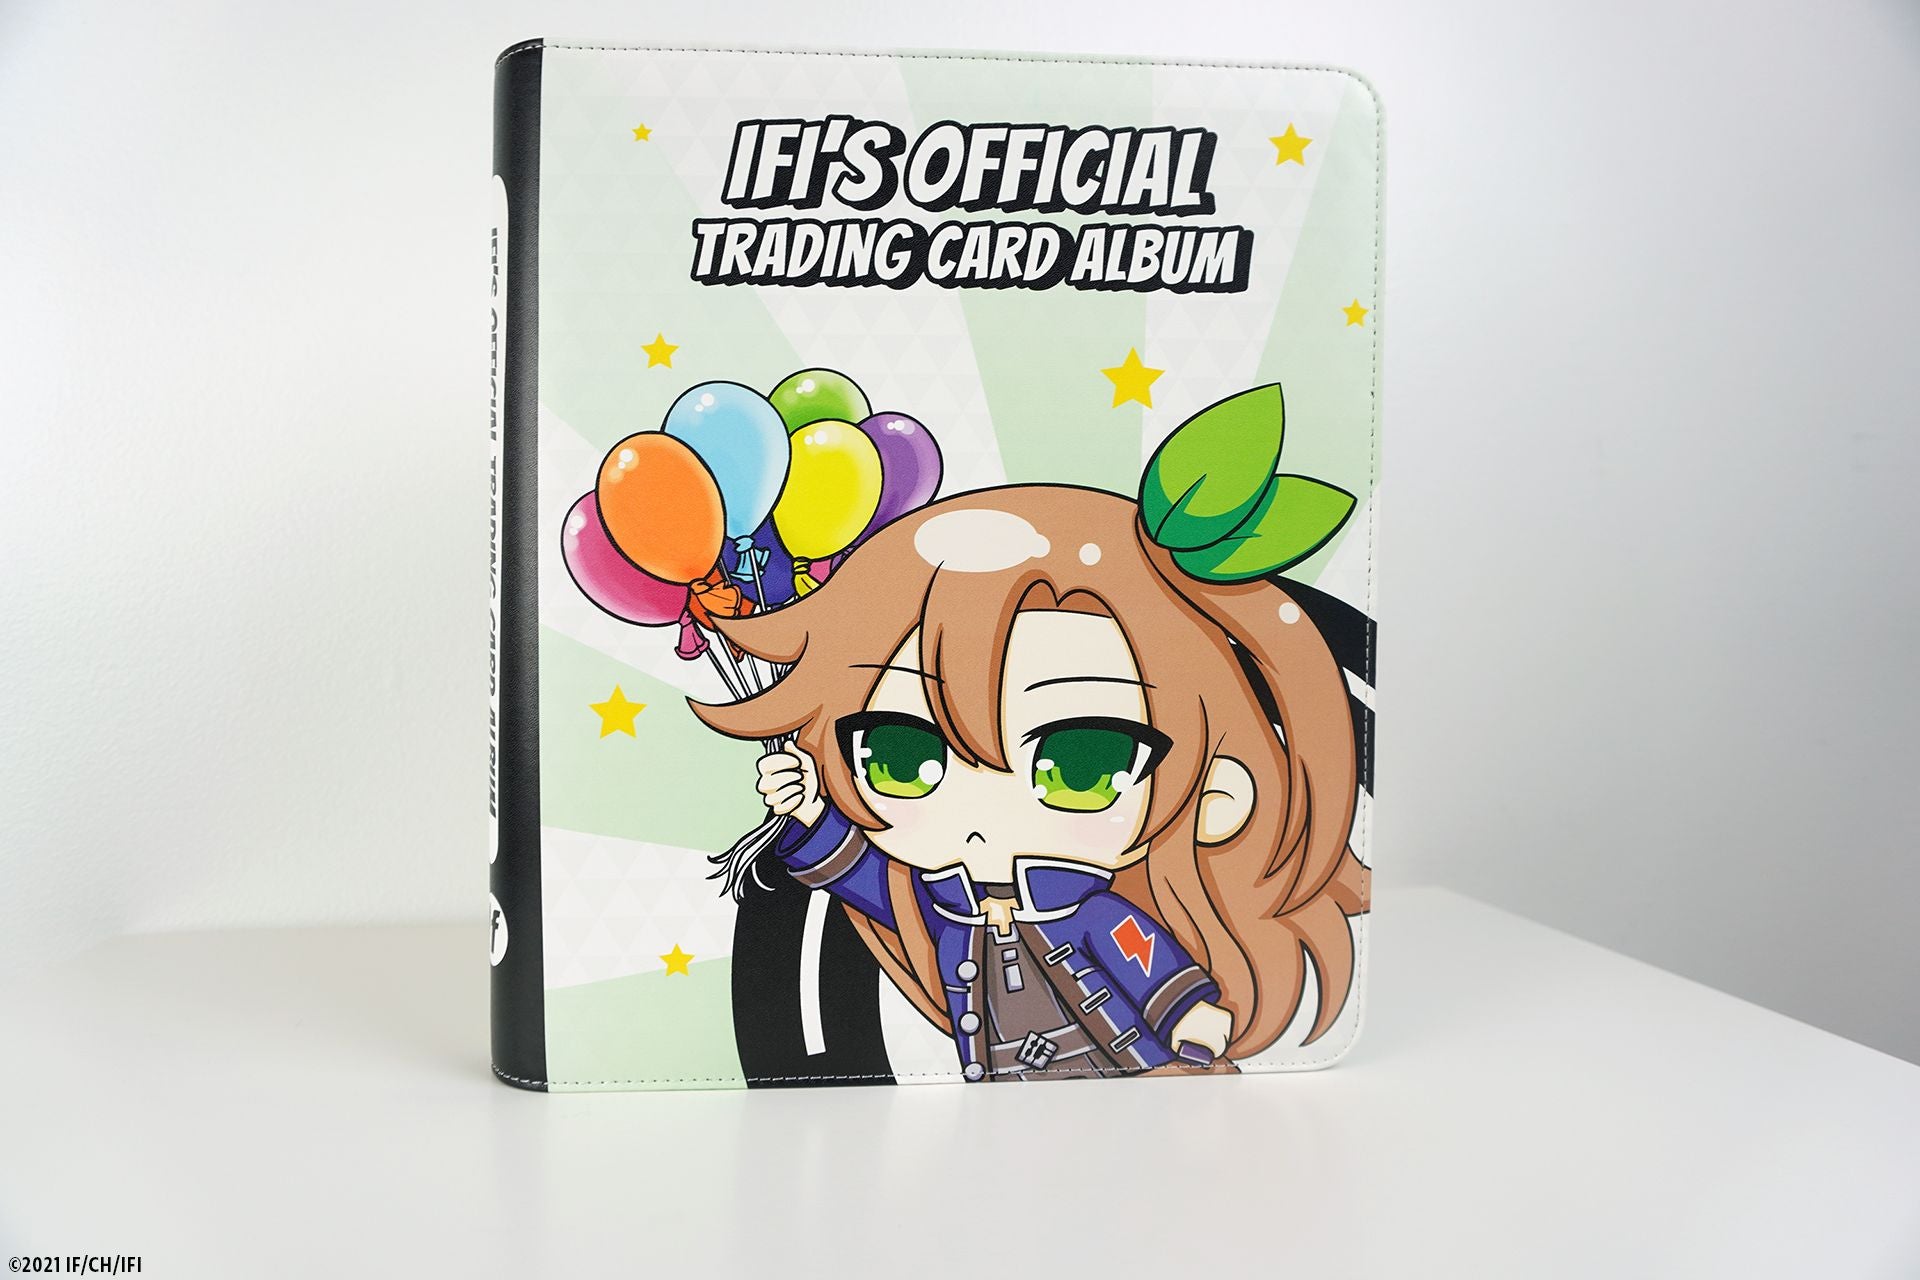 IFI's Official Trading Card Album